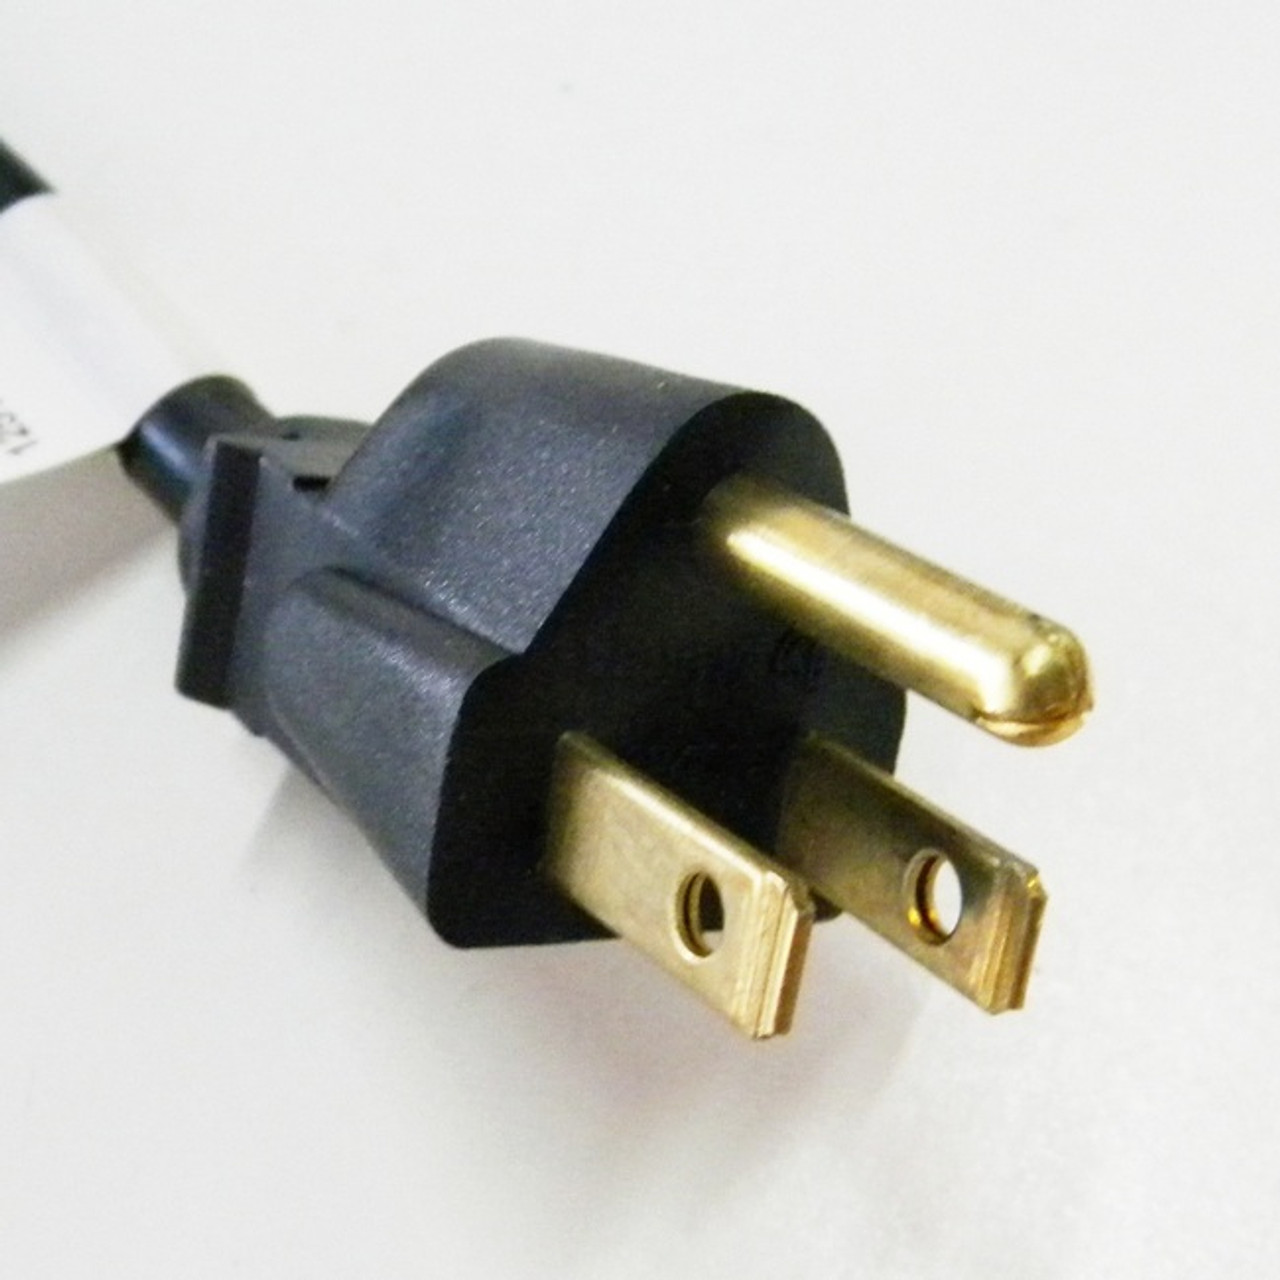 Treadmill Power Cord Part Number 258920